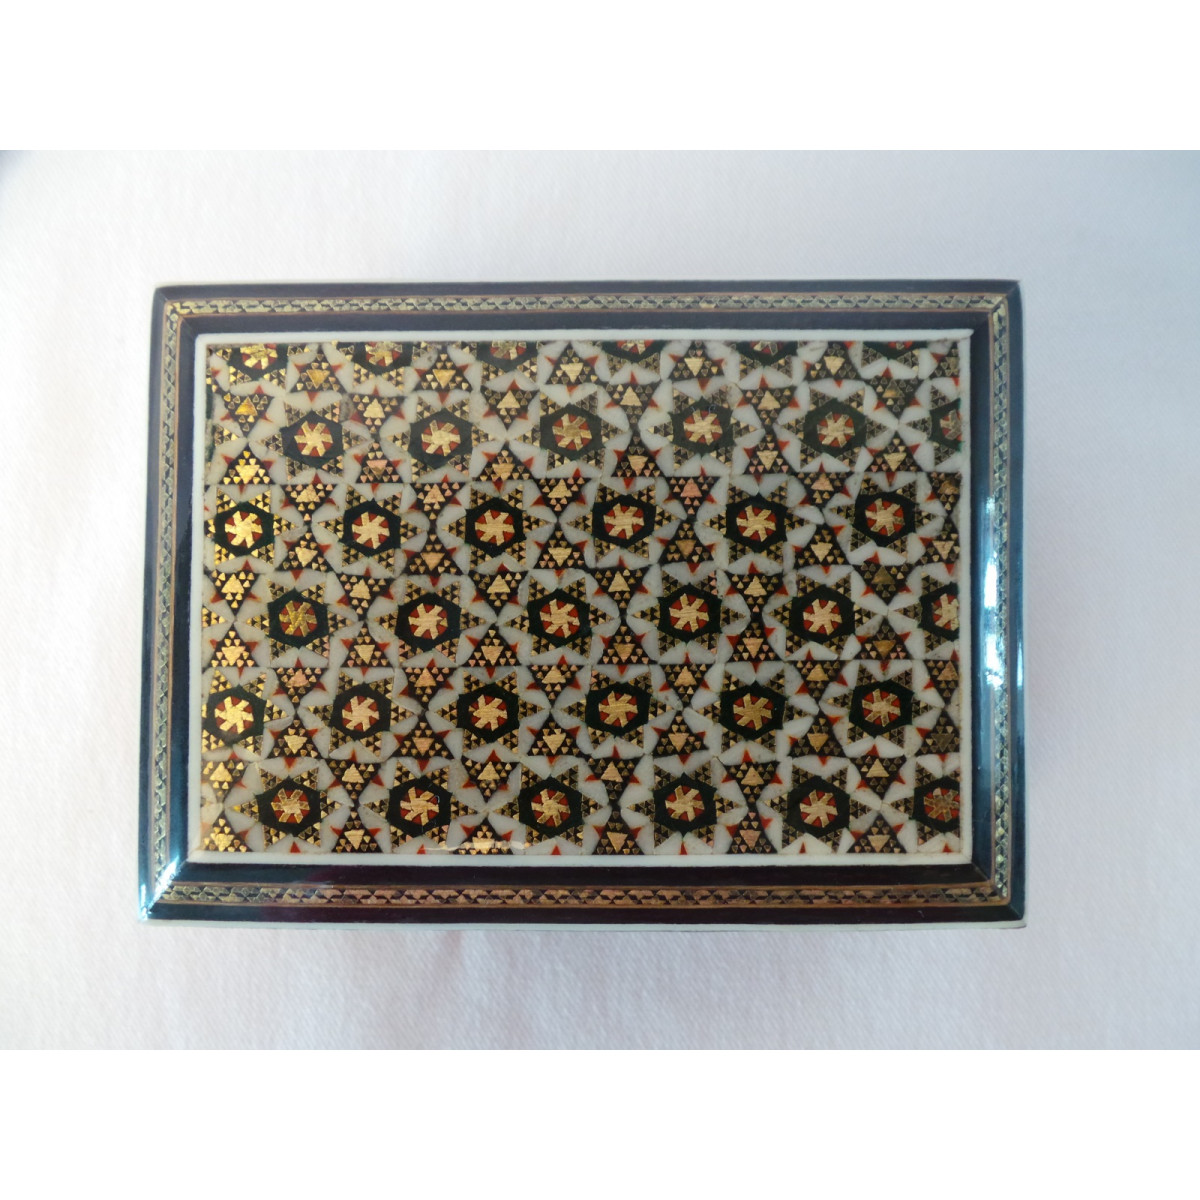 Wood and Copper Inlaying Jewelry Box - HI1012-Persian Handicrafts